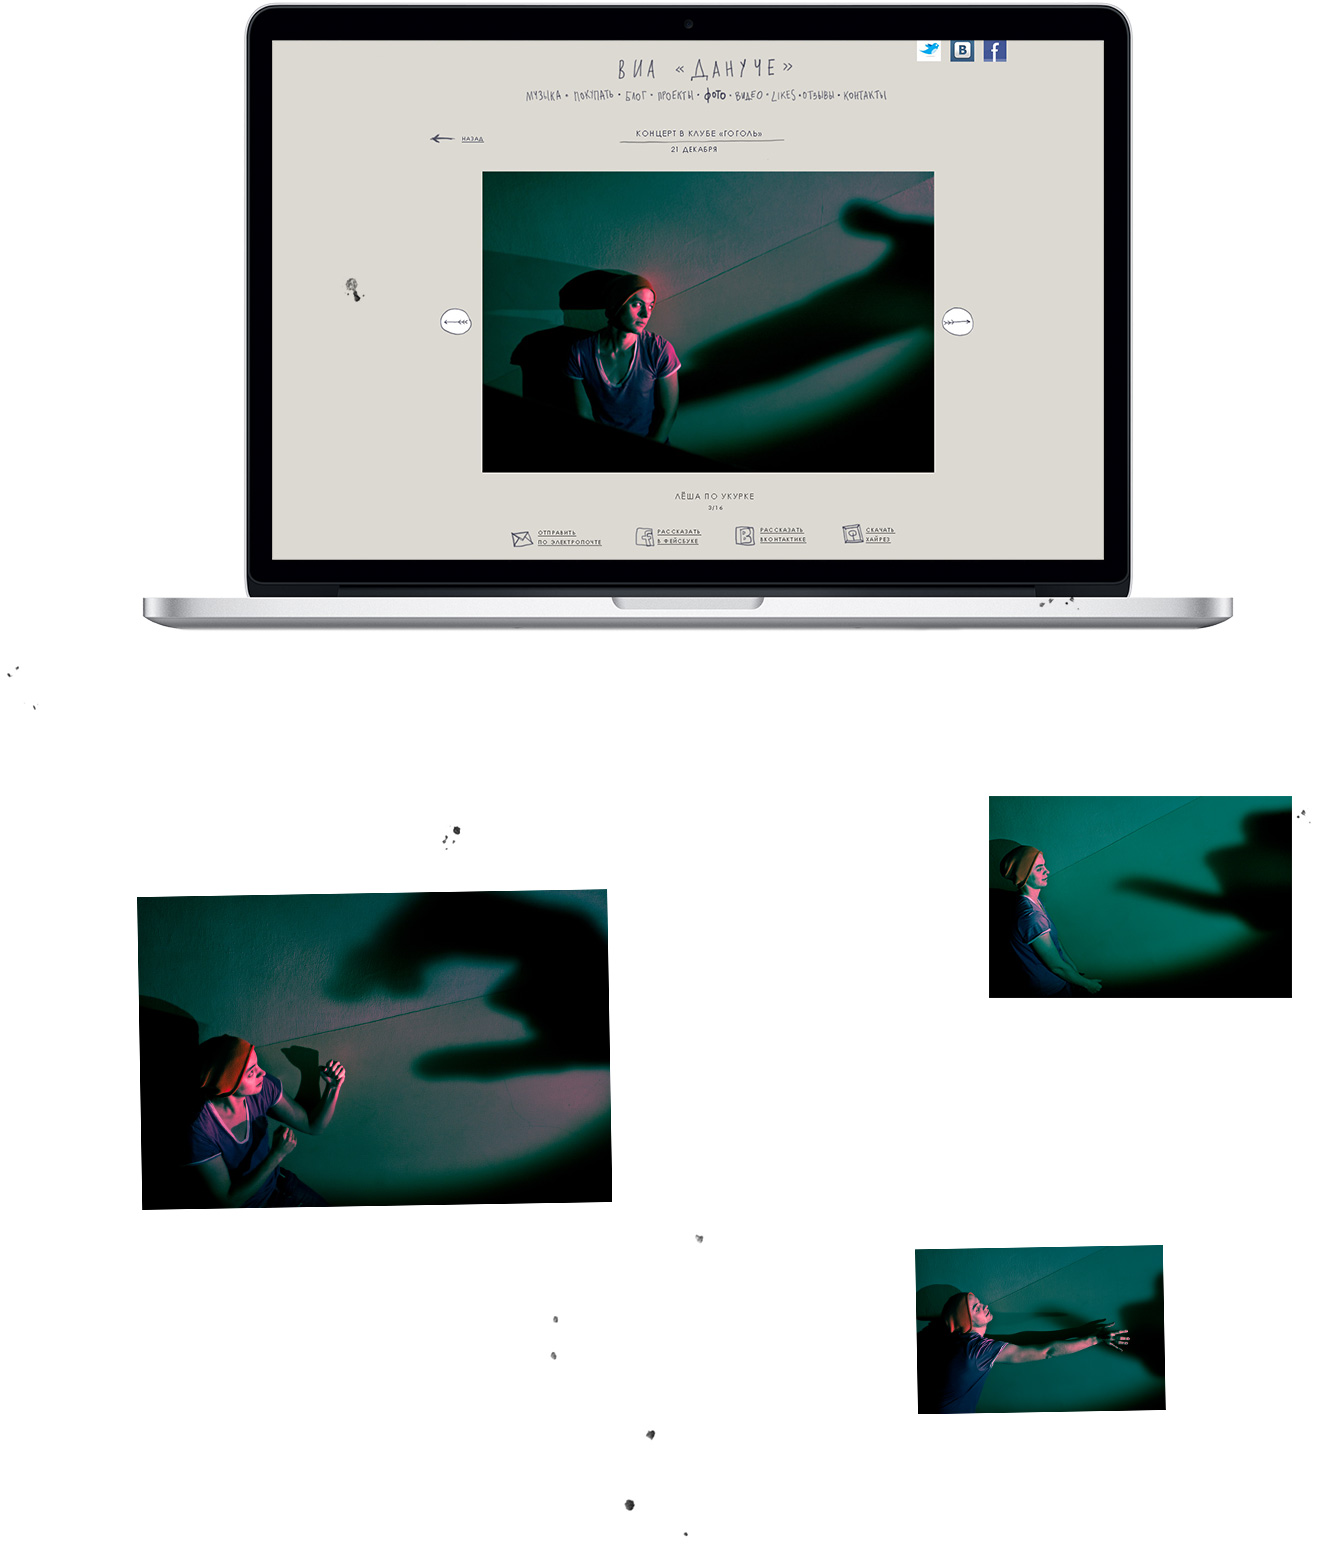 macbook with a photos section opened on it